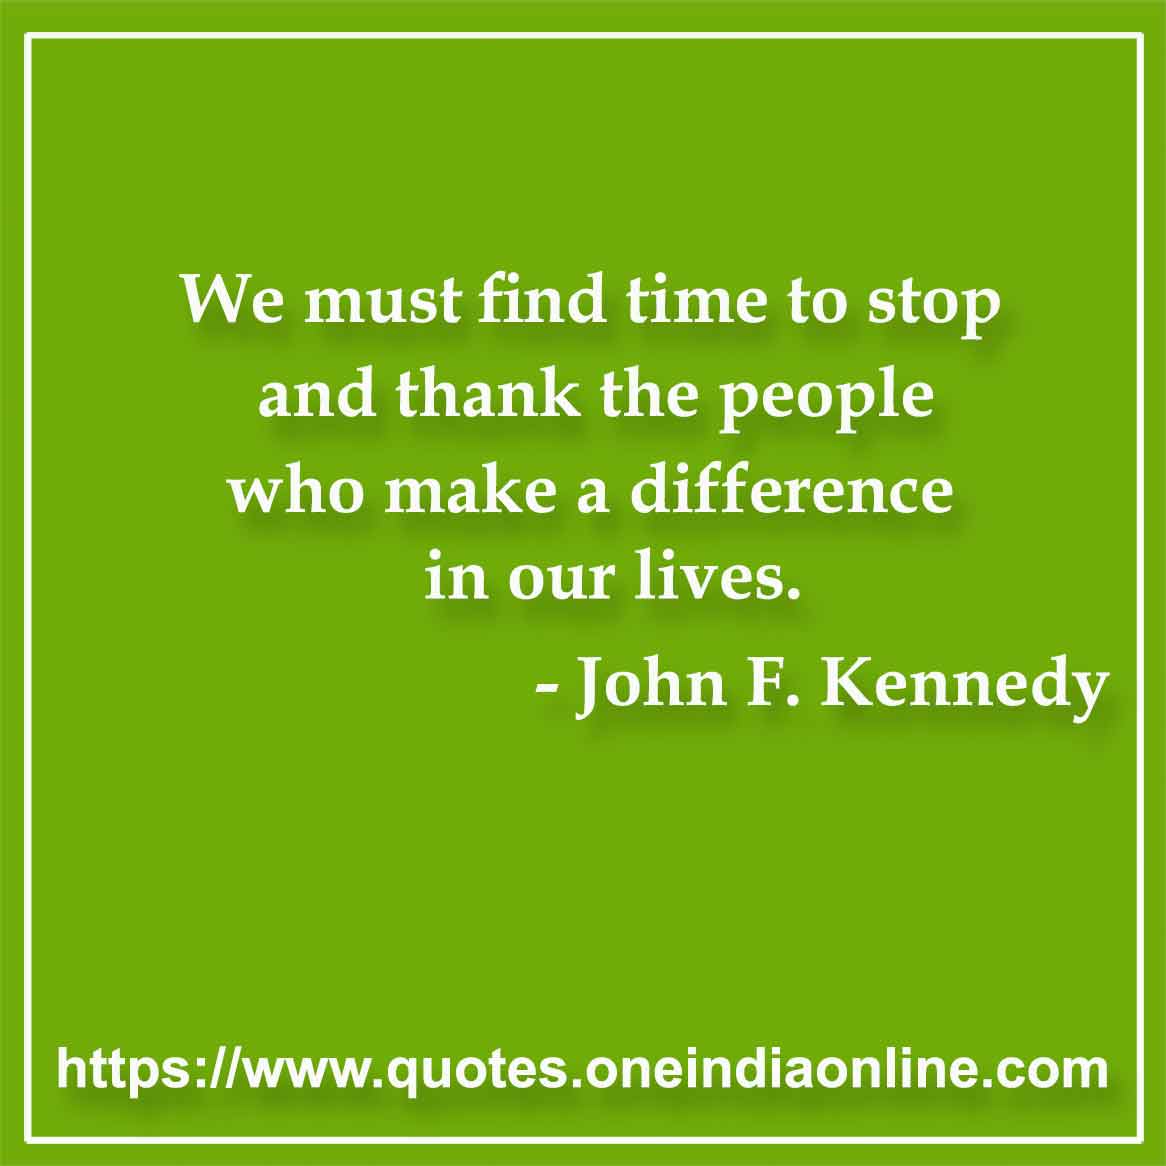 We must find time to stop and thank the people who make a difference in our lives. 

- John F. Kennedy